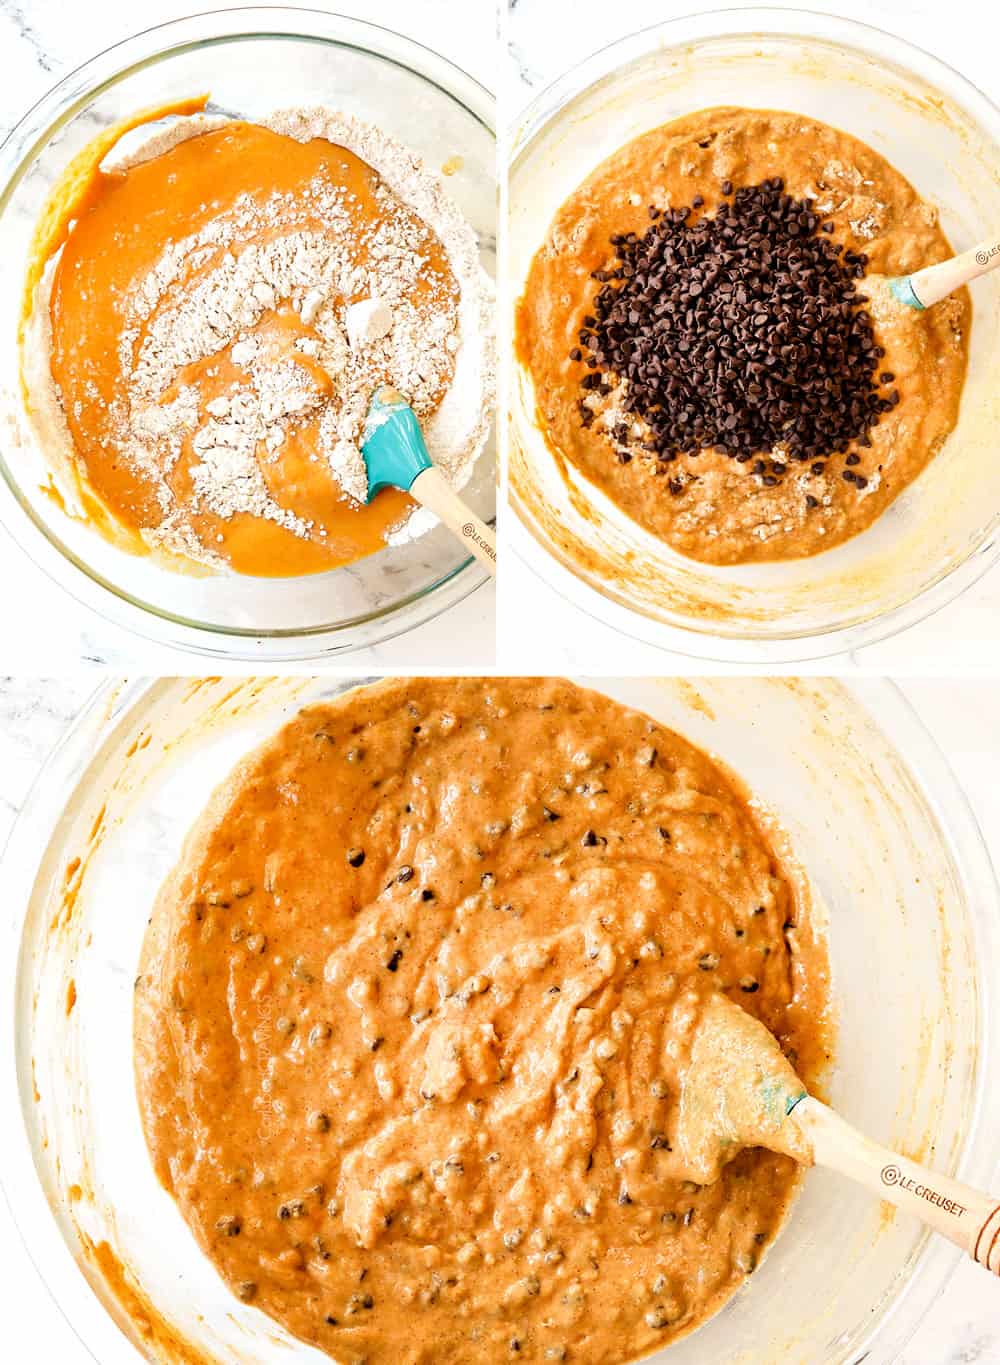 a collage showing how to make pumpkin pancake recipe by whisking dry ingredients into pumpkin ingredients, adding chocolate chips, then mixing the batter with the chocolate chips